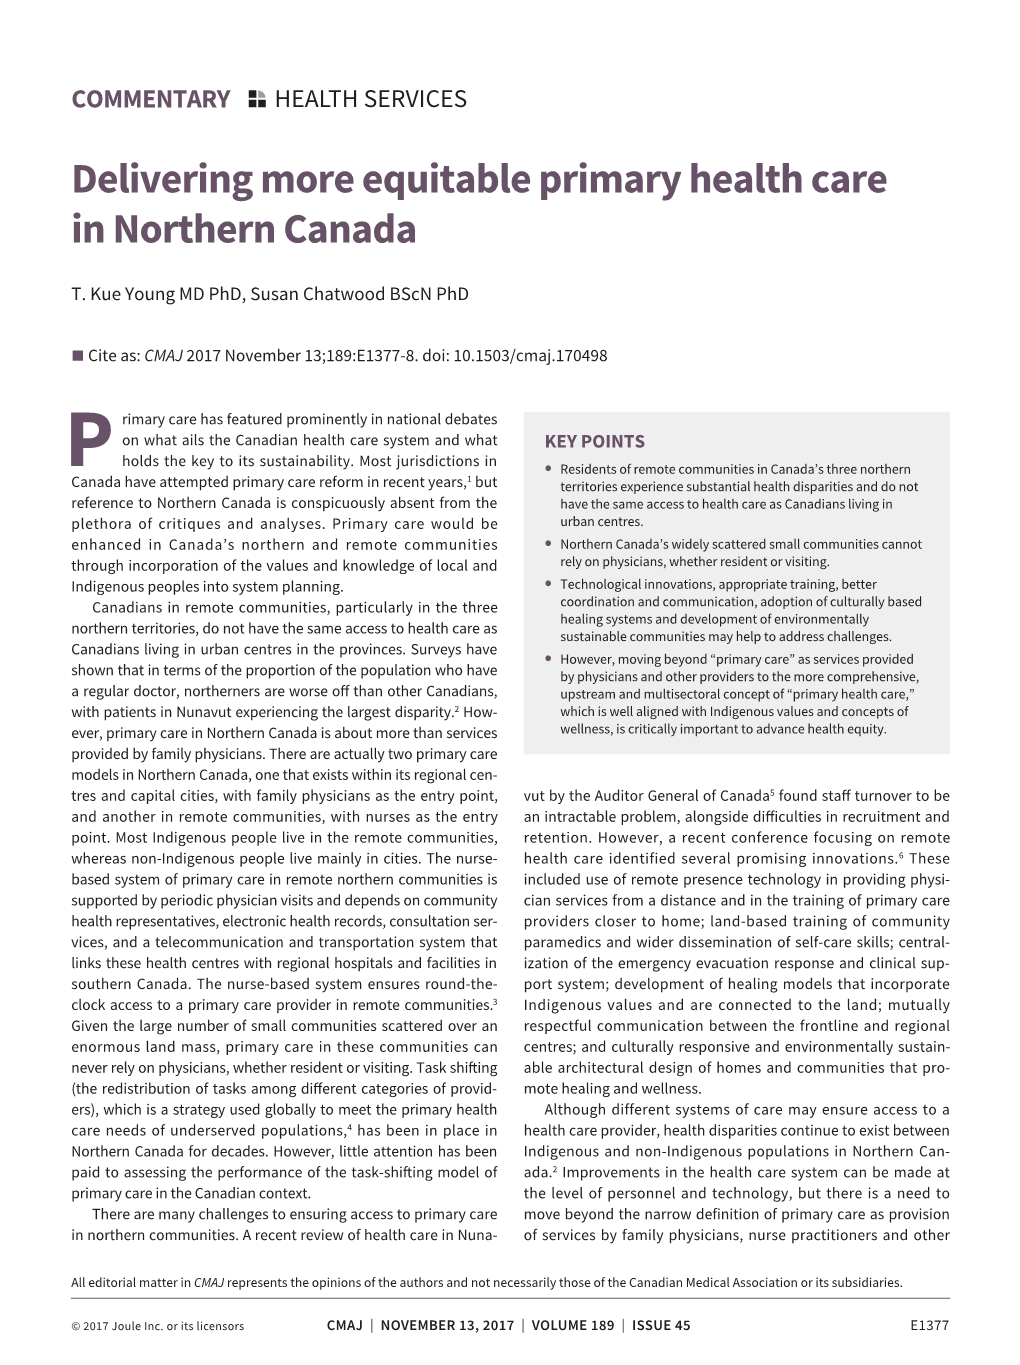 Delivering More Equitable Primary Health Care in Northern Canada